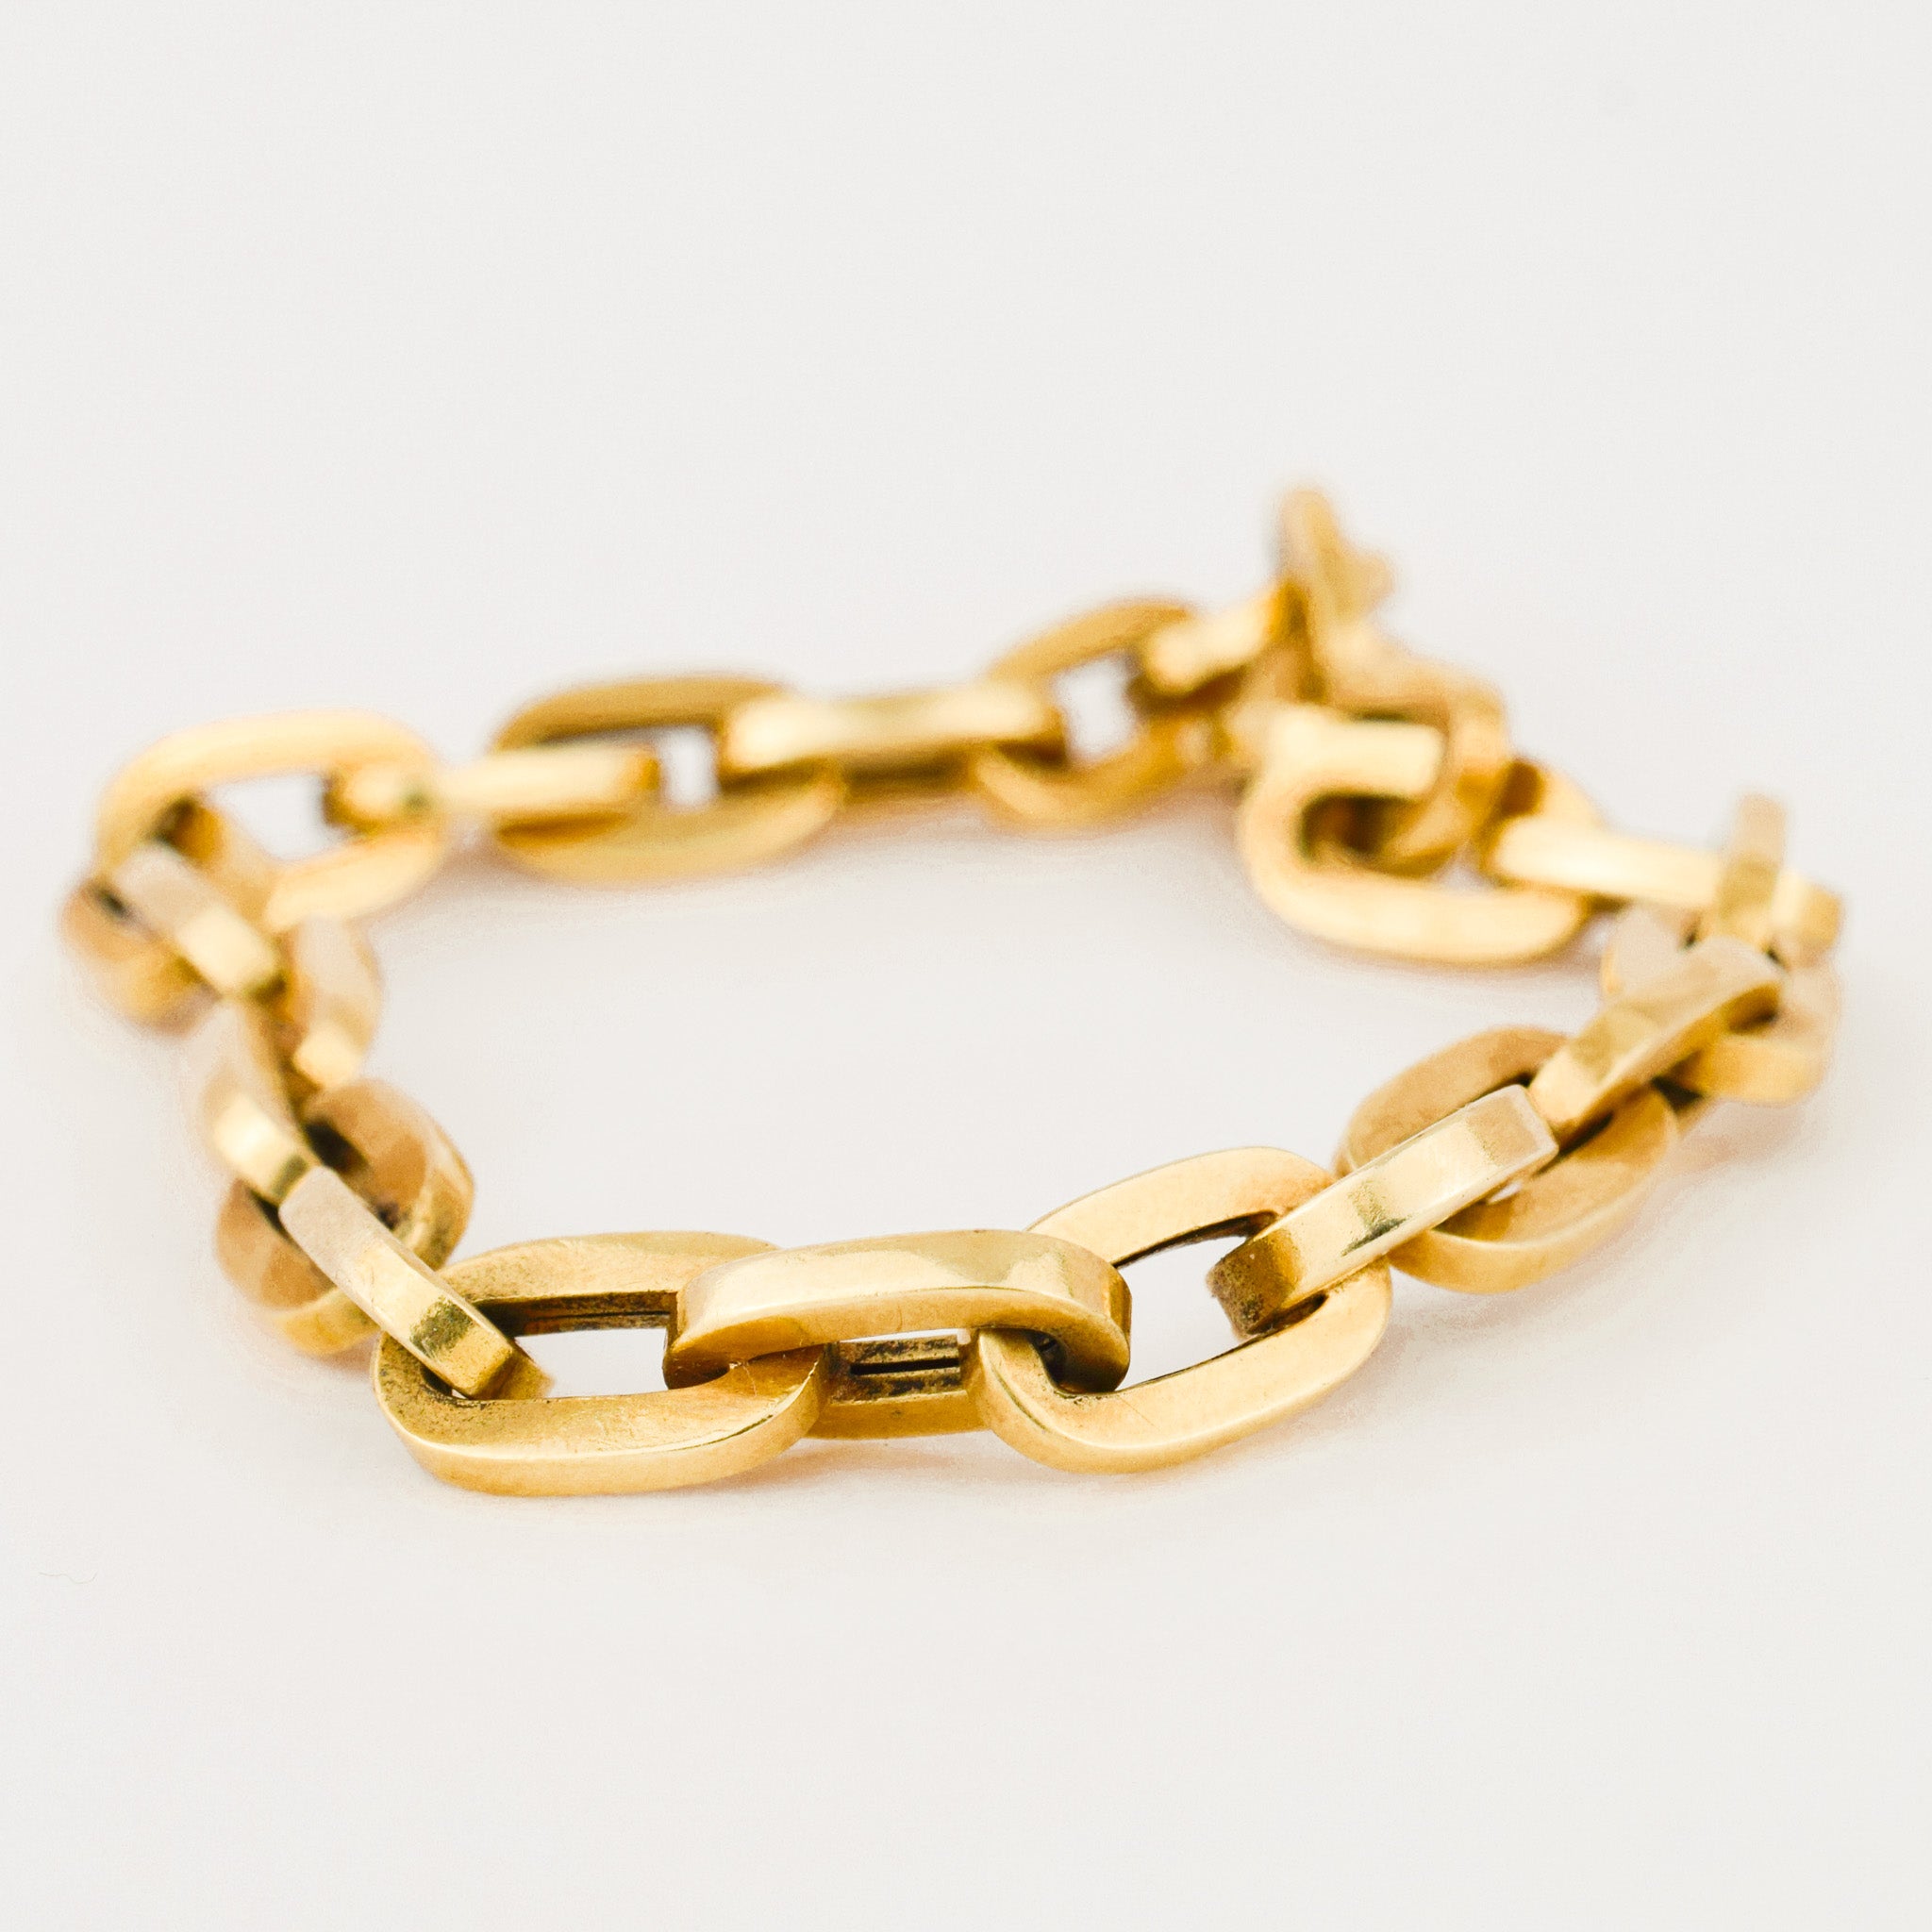 8" Chunky Cable Link Chain Bracelet